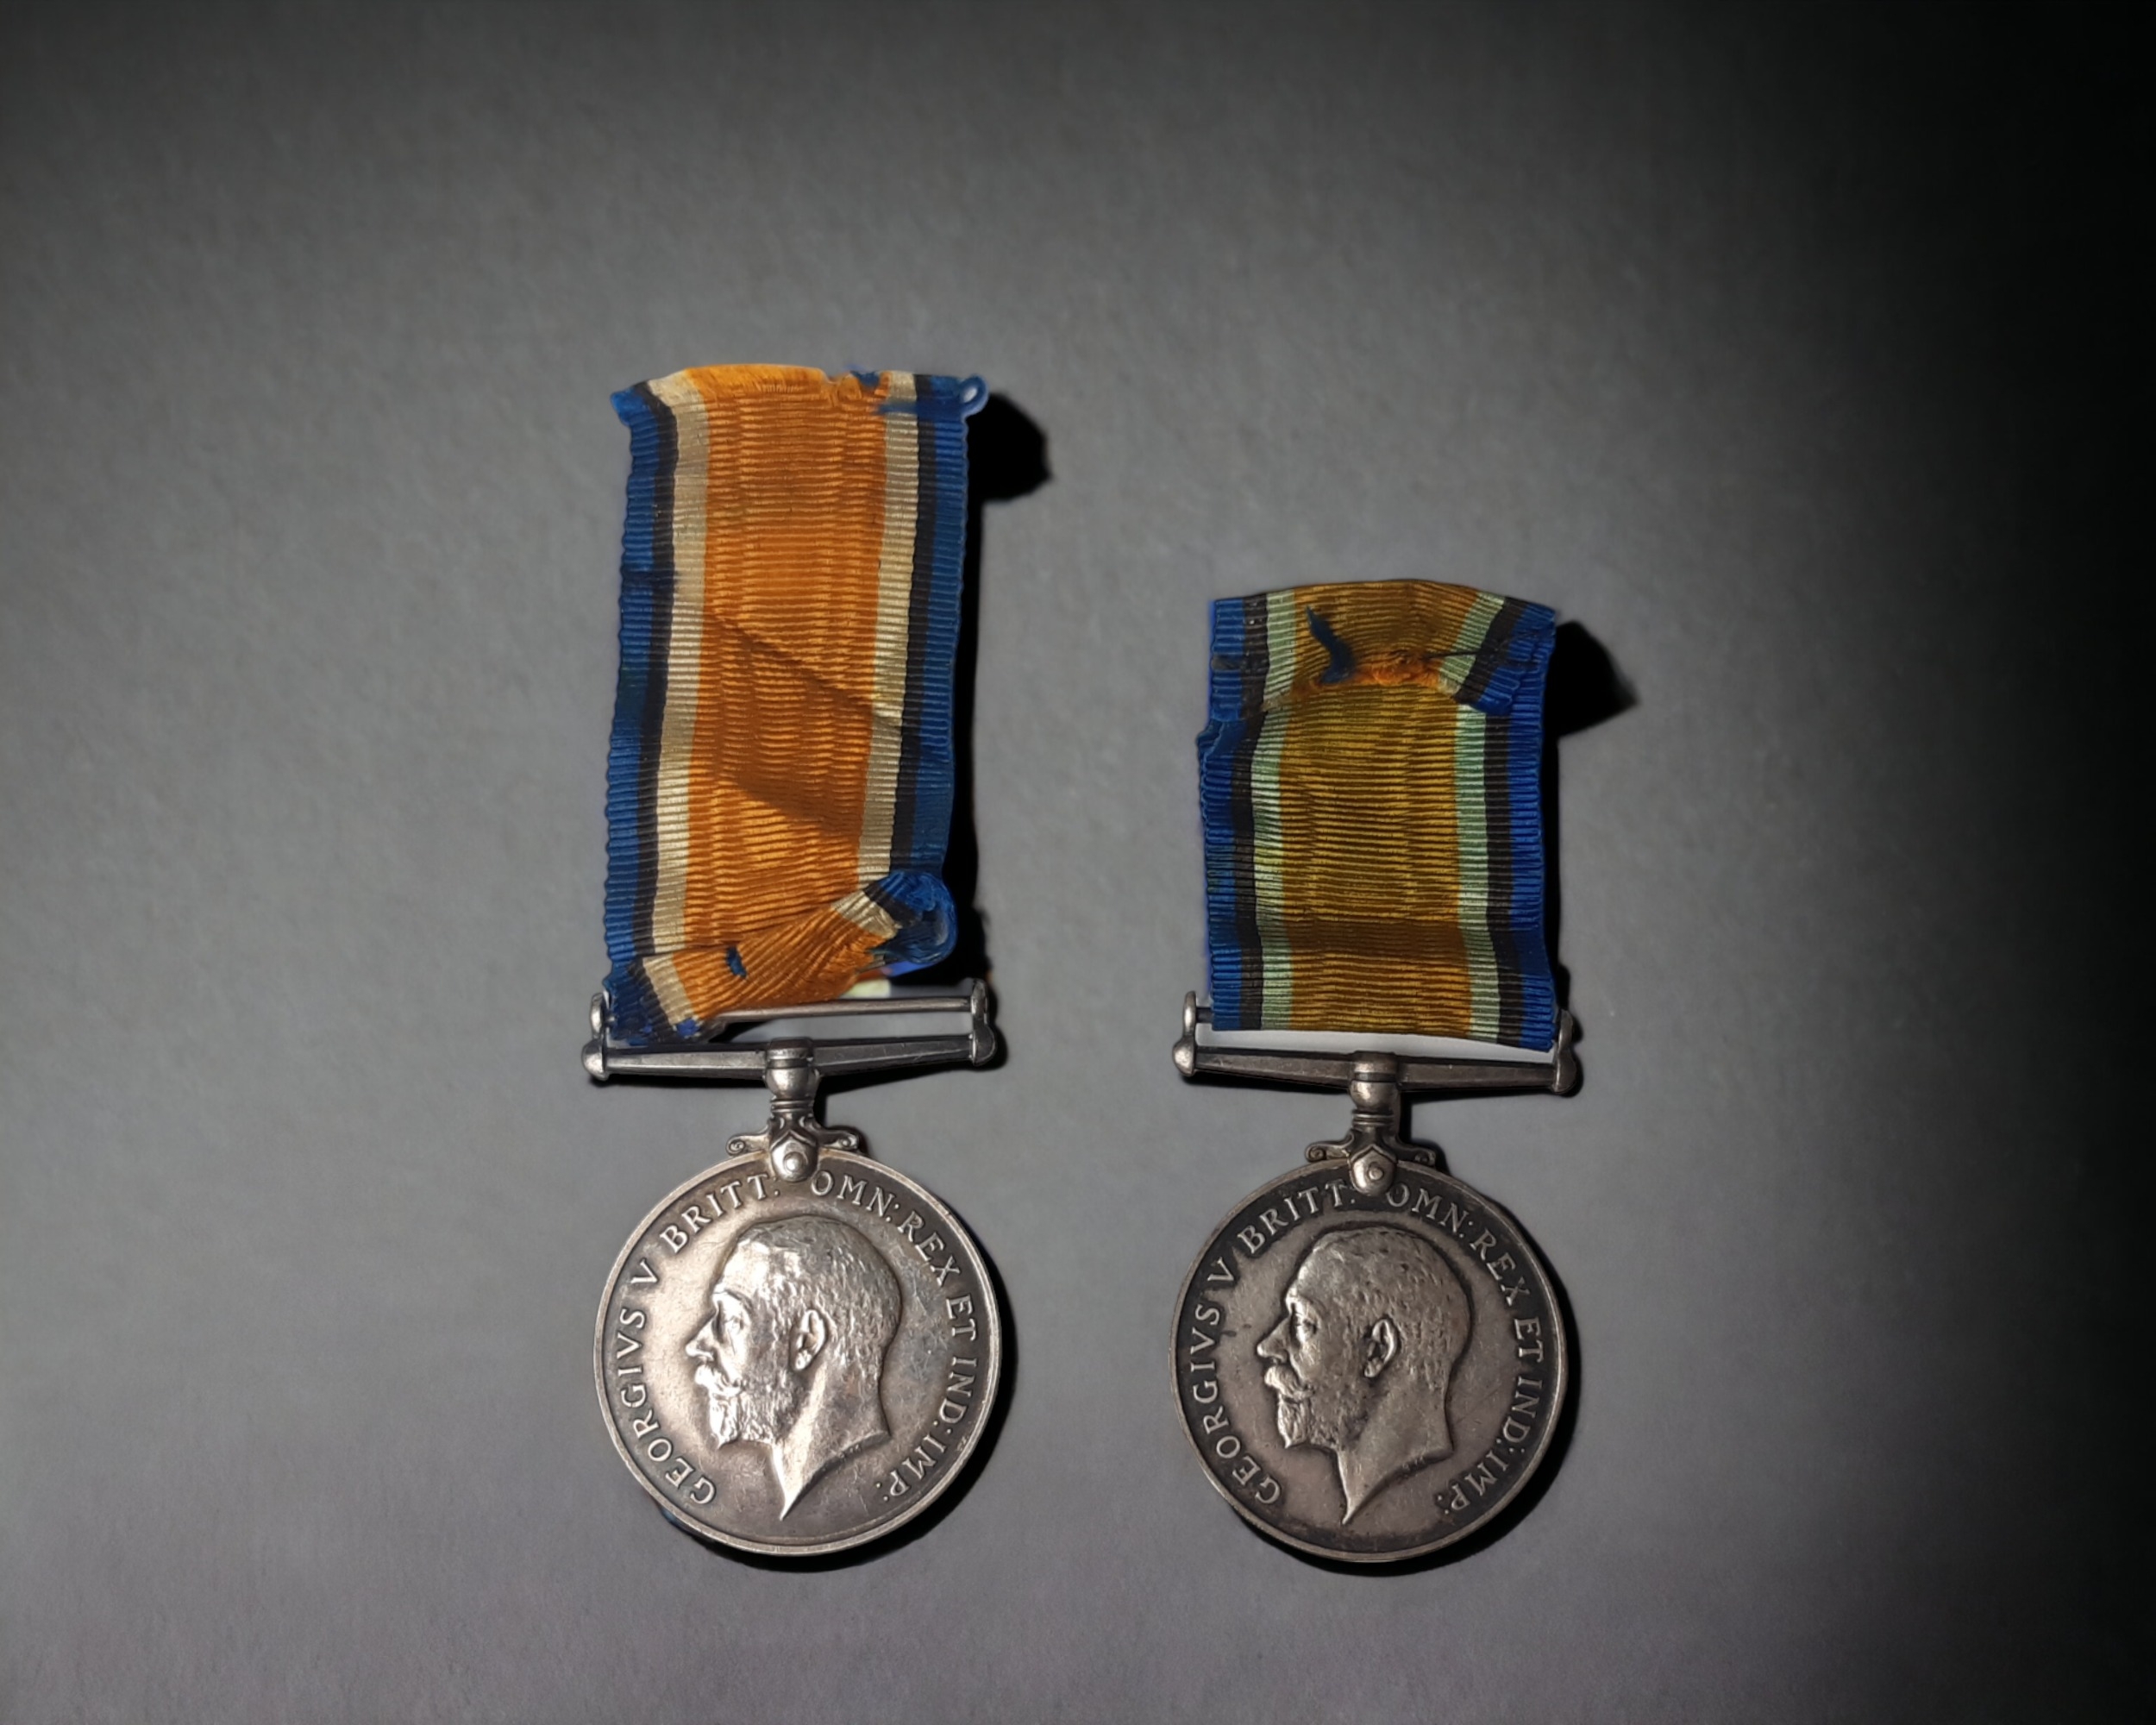 TWO WWI GEORGE V BRITISH WAR MEDALS. WITH RIBBONS. ONE NAMED 'DVR. T. SEAL. R.E.' THE OTHER